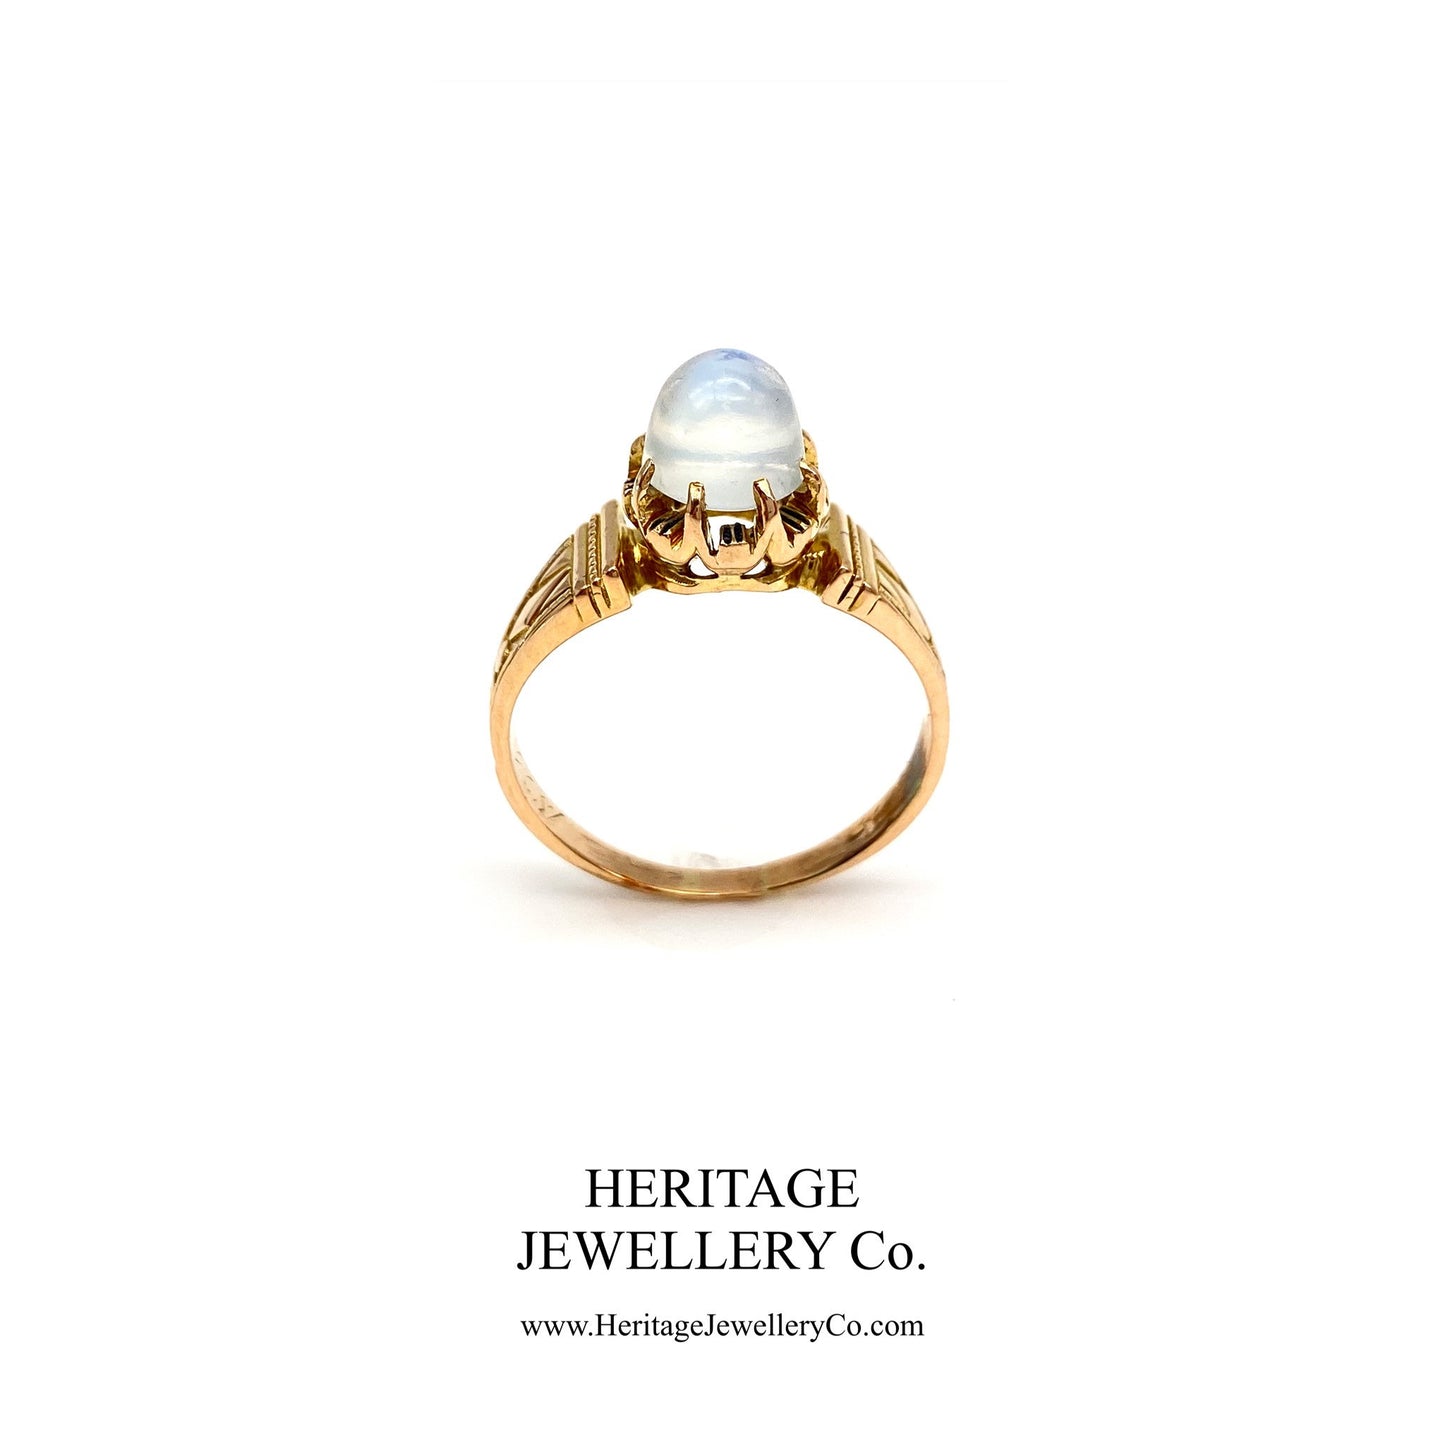 Early Victorian Cabochon Moonstone Ring (c. 1847)